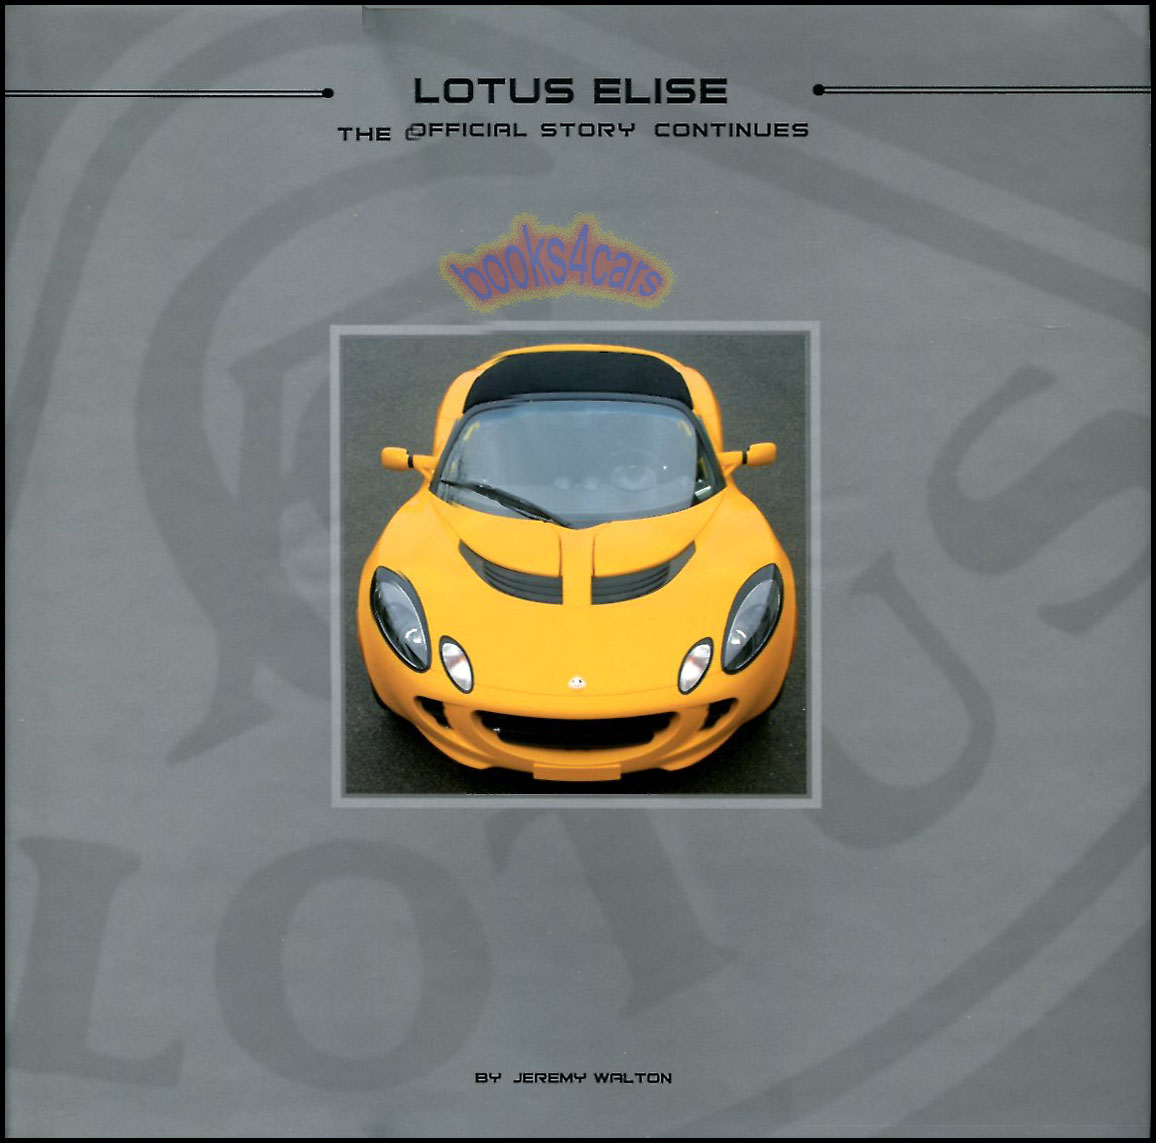 The Official Story of the Lotus Elise The Official Story Continues Vol 2: 208 oversize 12'x12' hardcover pages by J. Walton